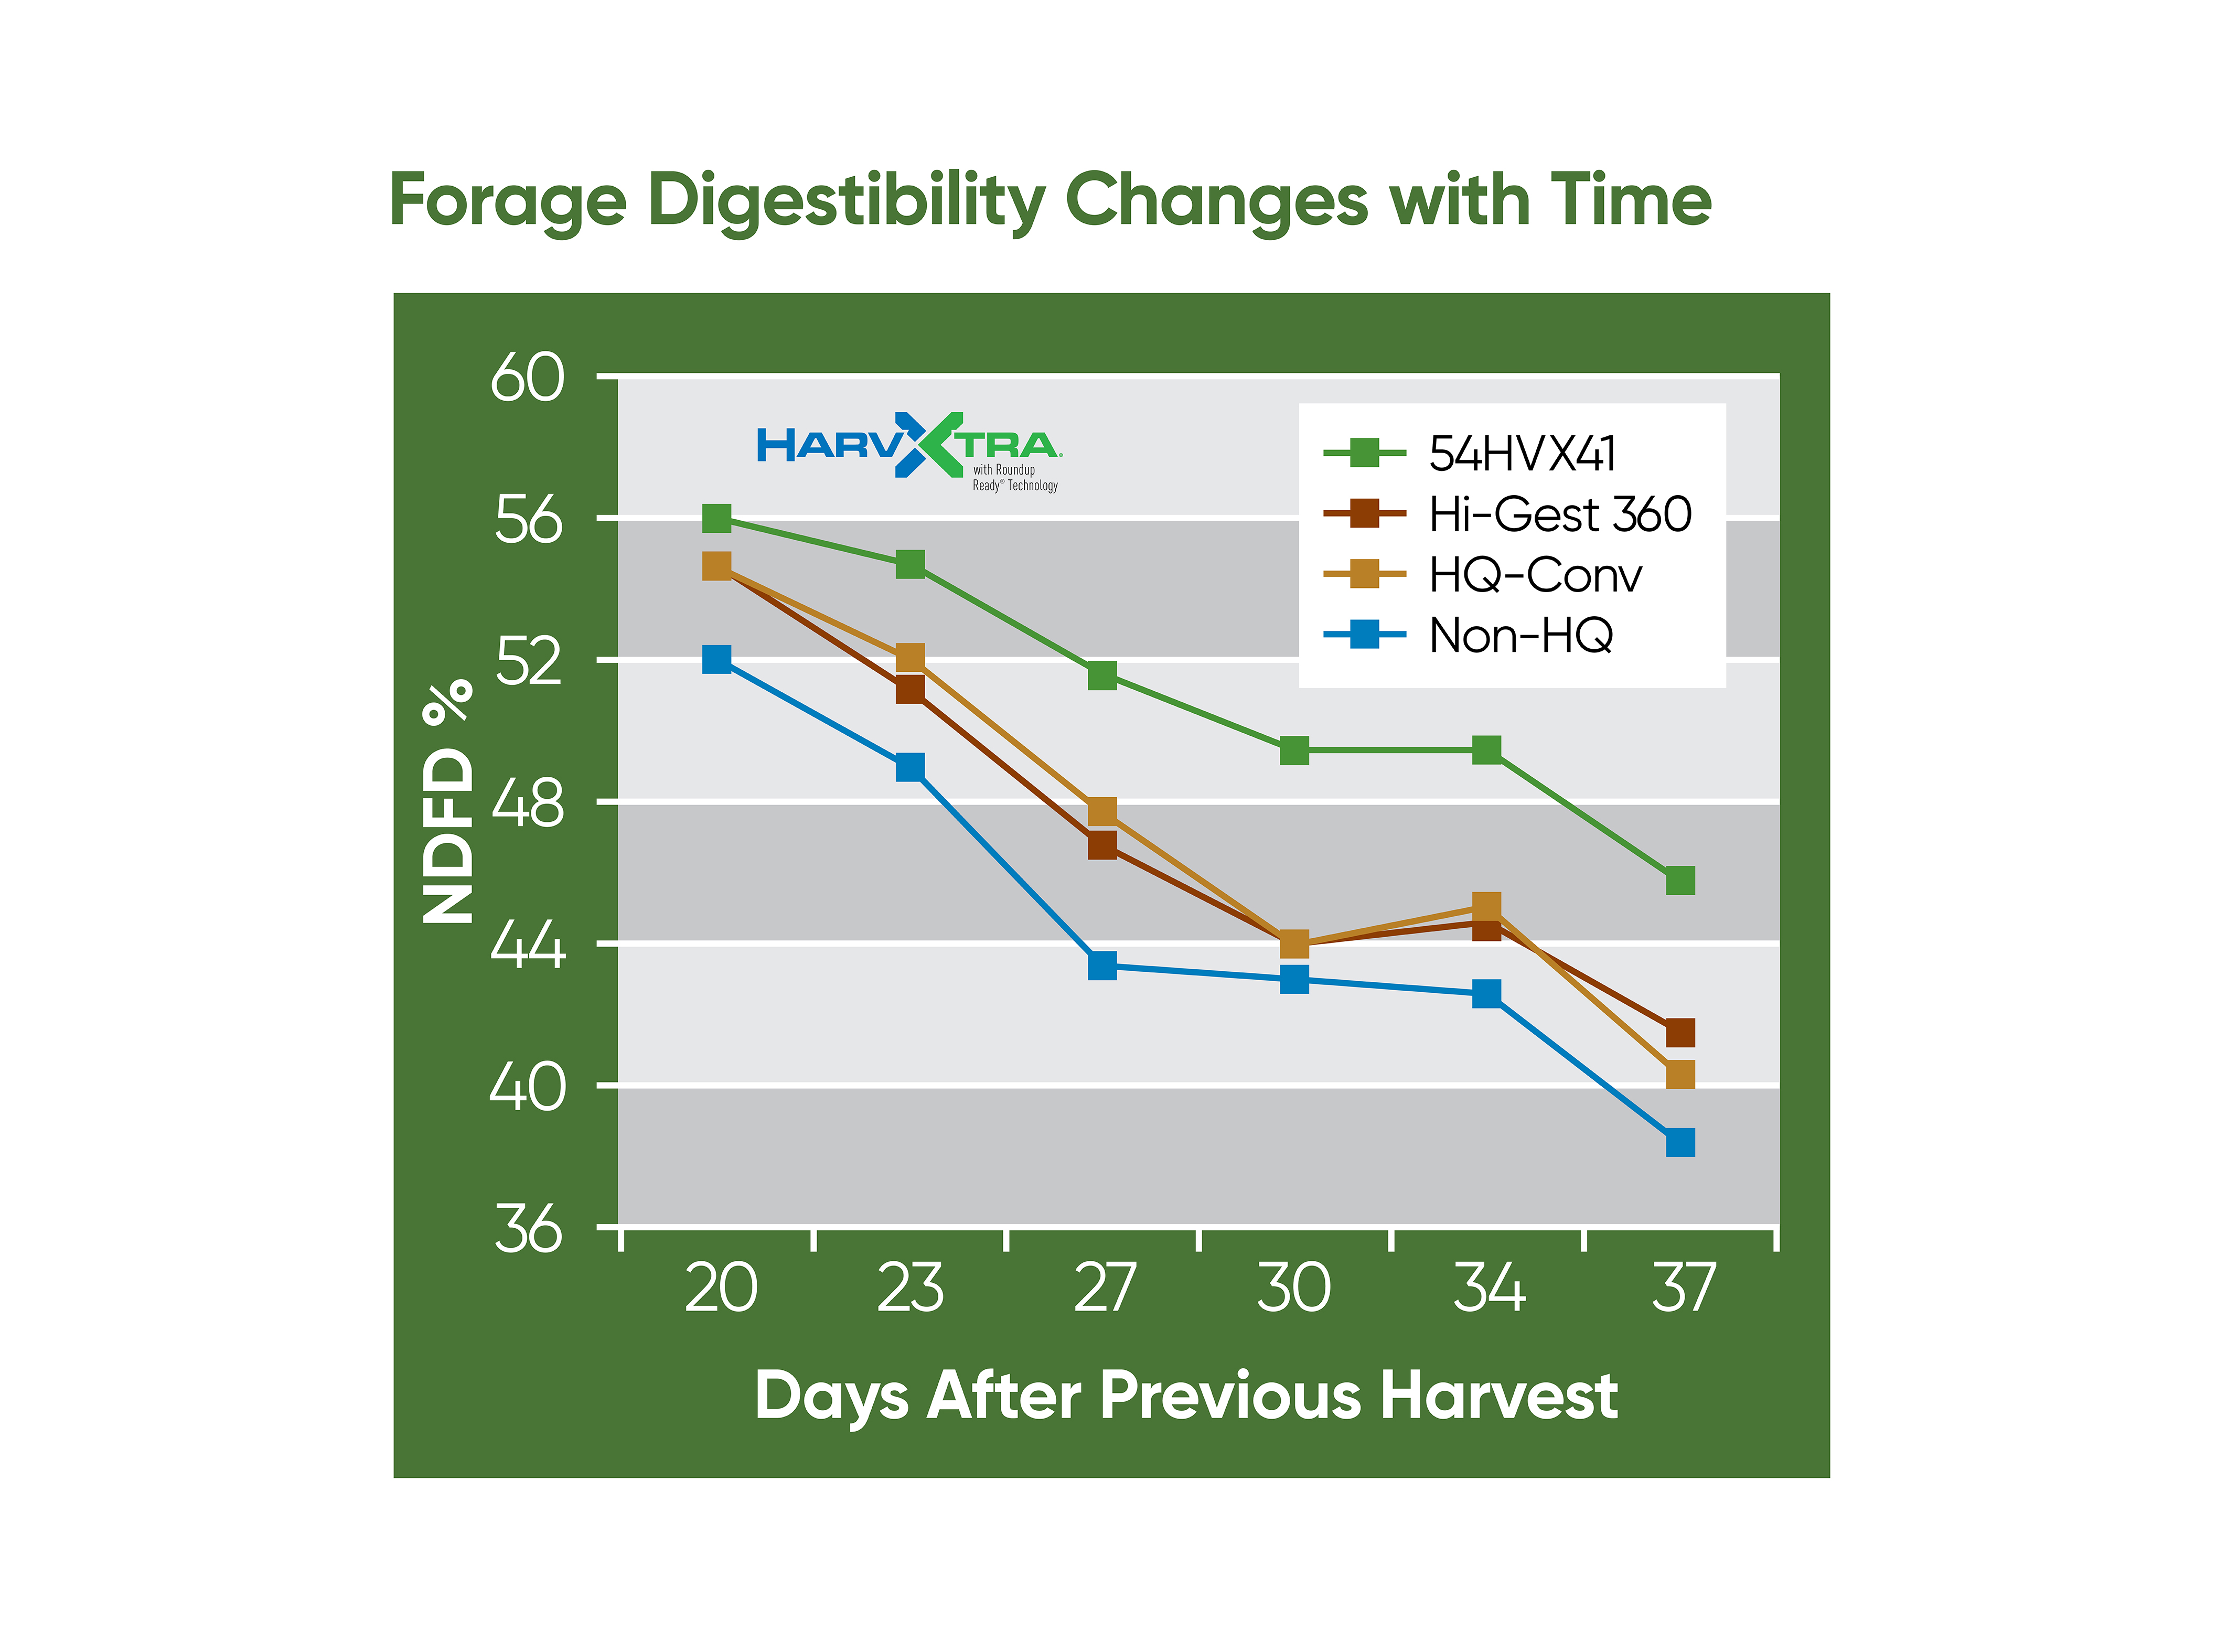 Alfalfa varieties with HarvXtra technology average 10 to 15 percent higher neutral detergent fiber digestibility across cuttings than conventional varieties.